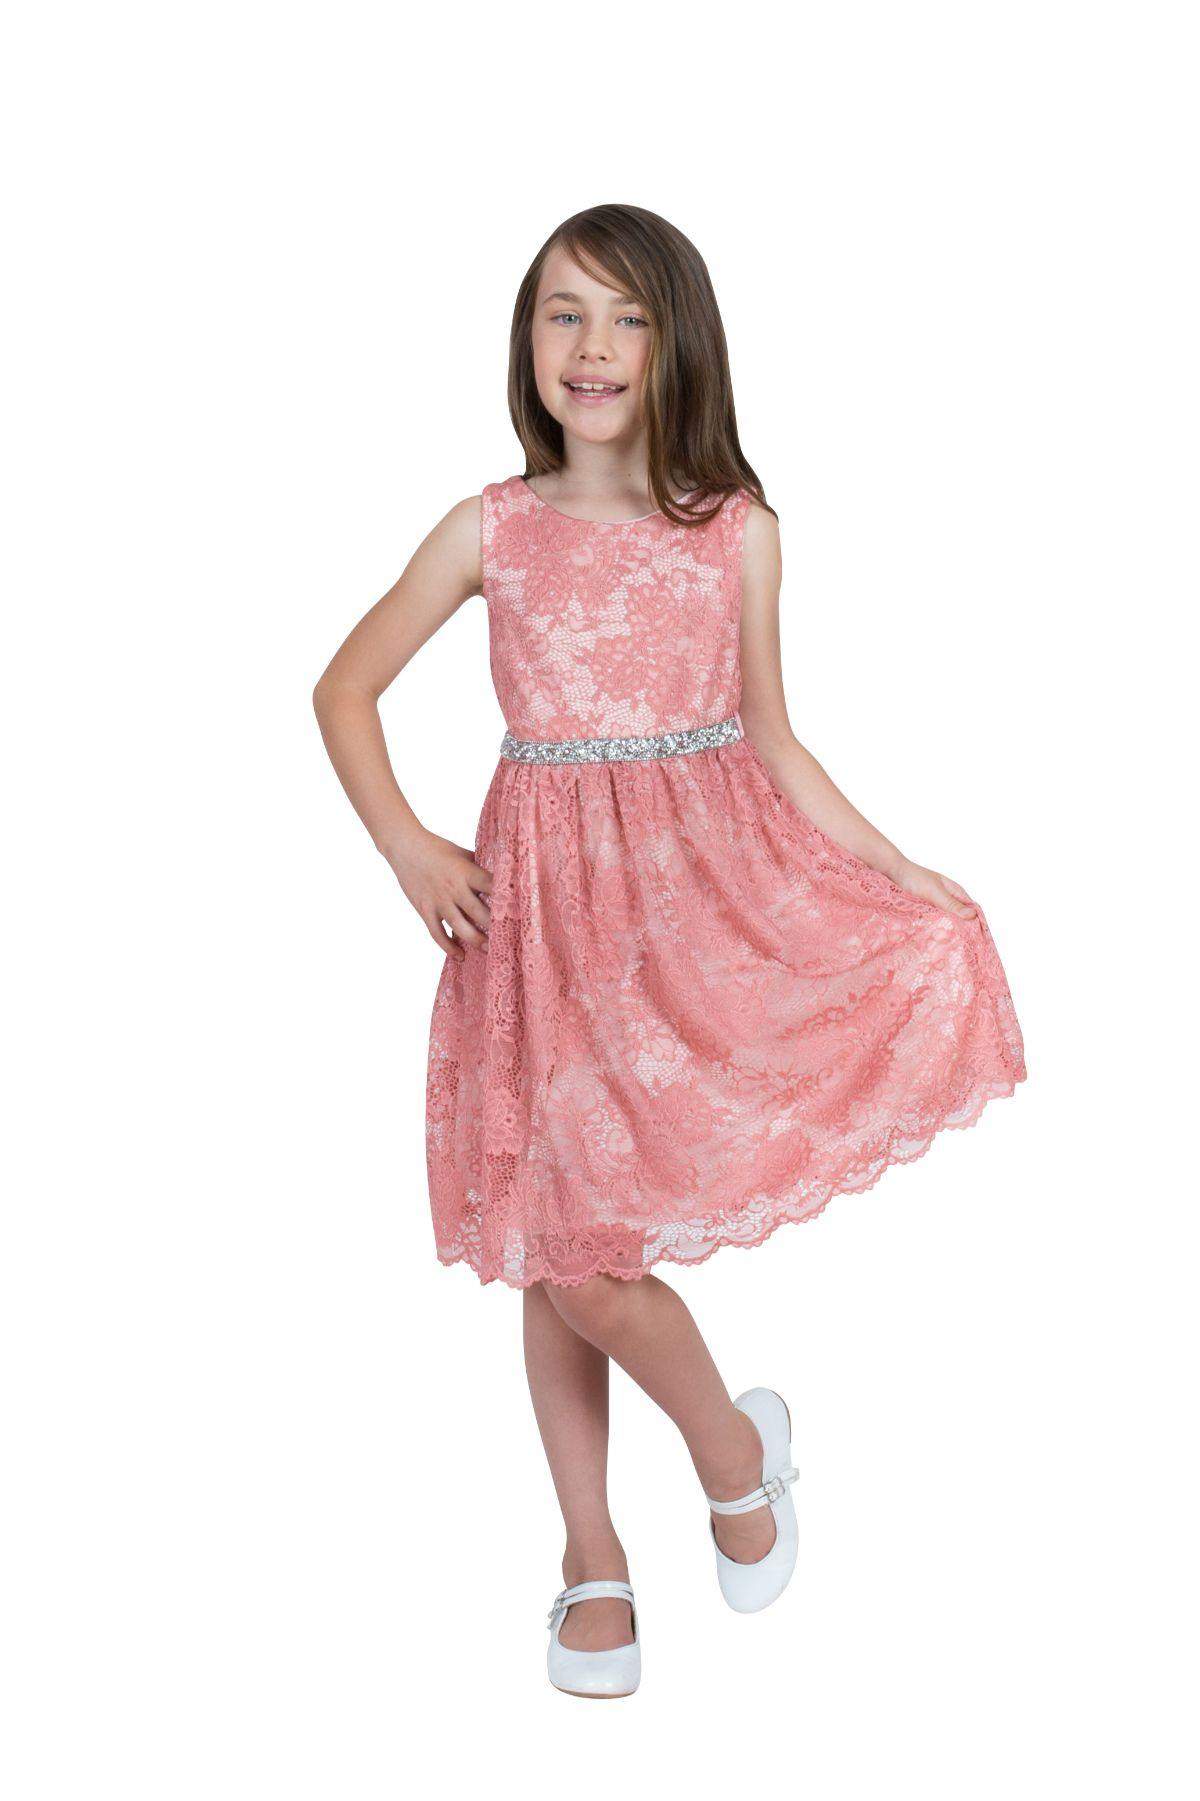 Stretch Lace Dress-Kid's Dream-big_girl,color_Blush Pink,Color_Coral,Color_Mint,fabric_Lace,girl-dress,length_Knee Length,meta-related-collection-shop-the-outfit-girls,Pink-collection,size_02,size_04,size_06,size_08,size_10,size_12